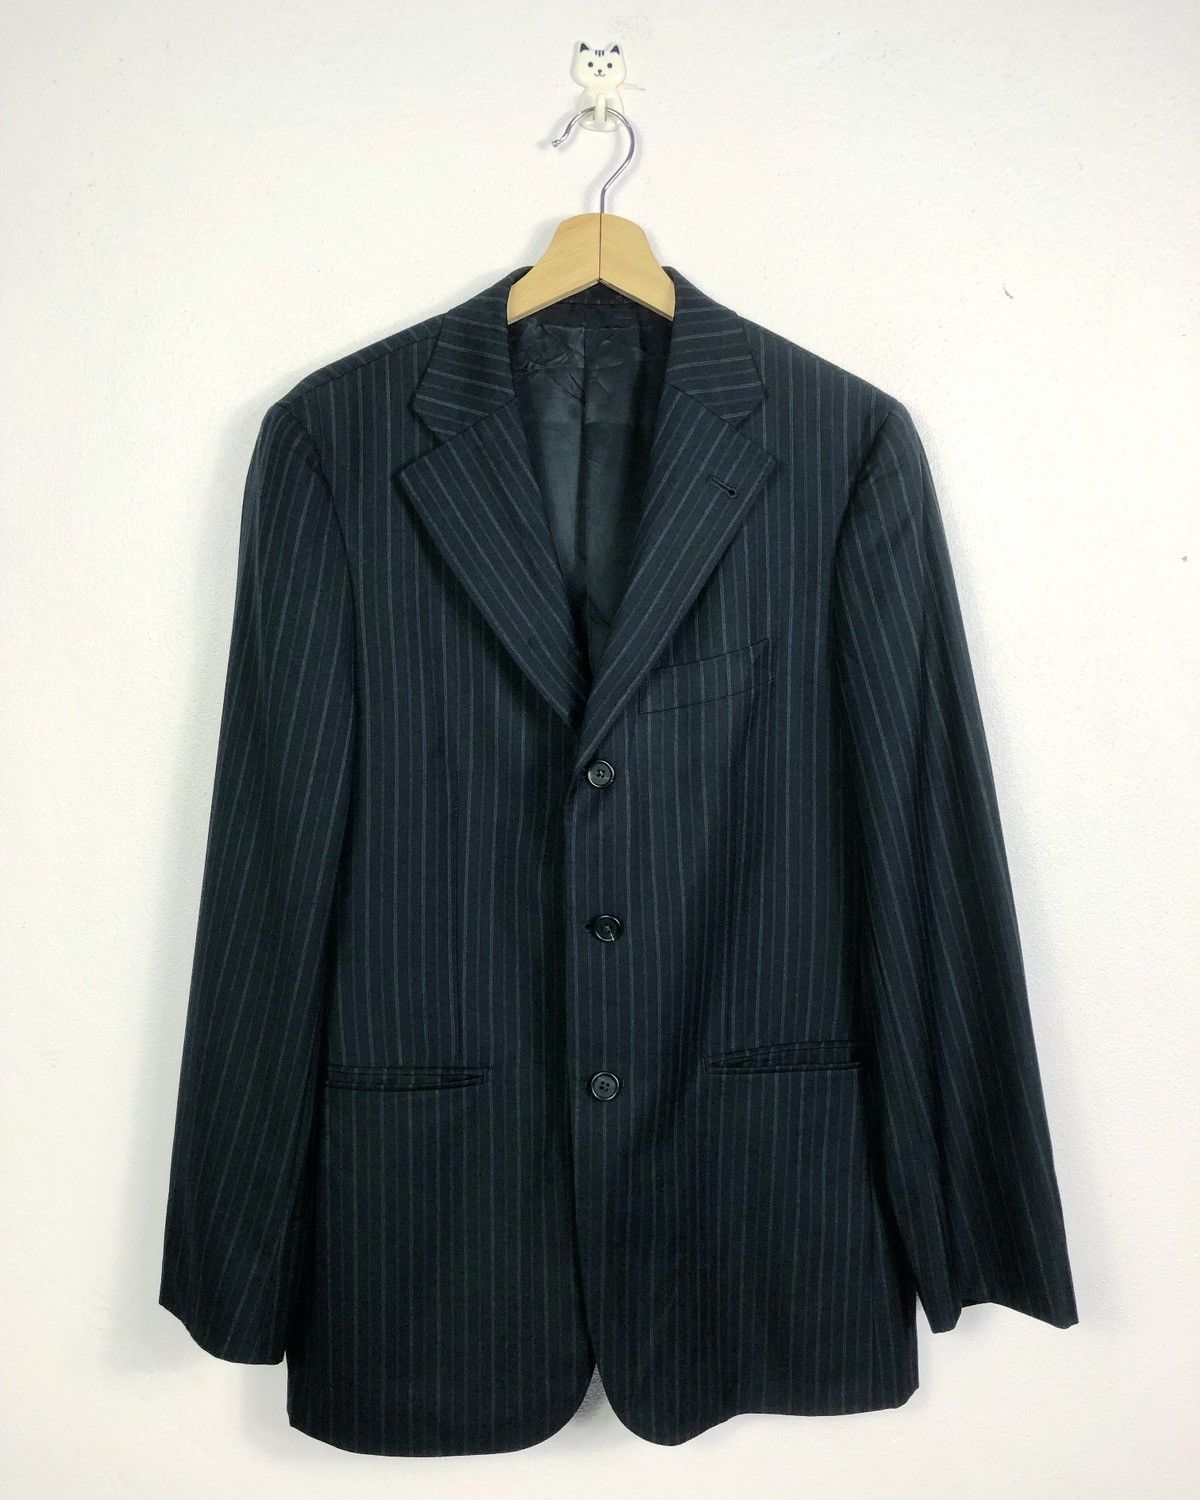 Paul Smith Rare Paul Smith London Blazer Suit Made in Italy Size US L / EU 52-54 / 3 - 1 Preview